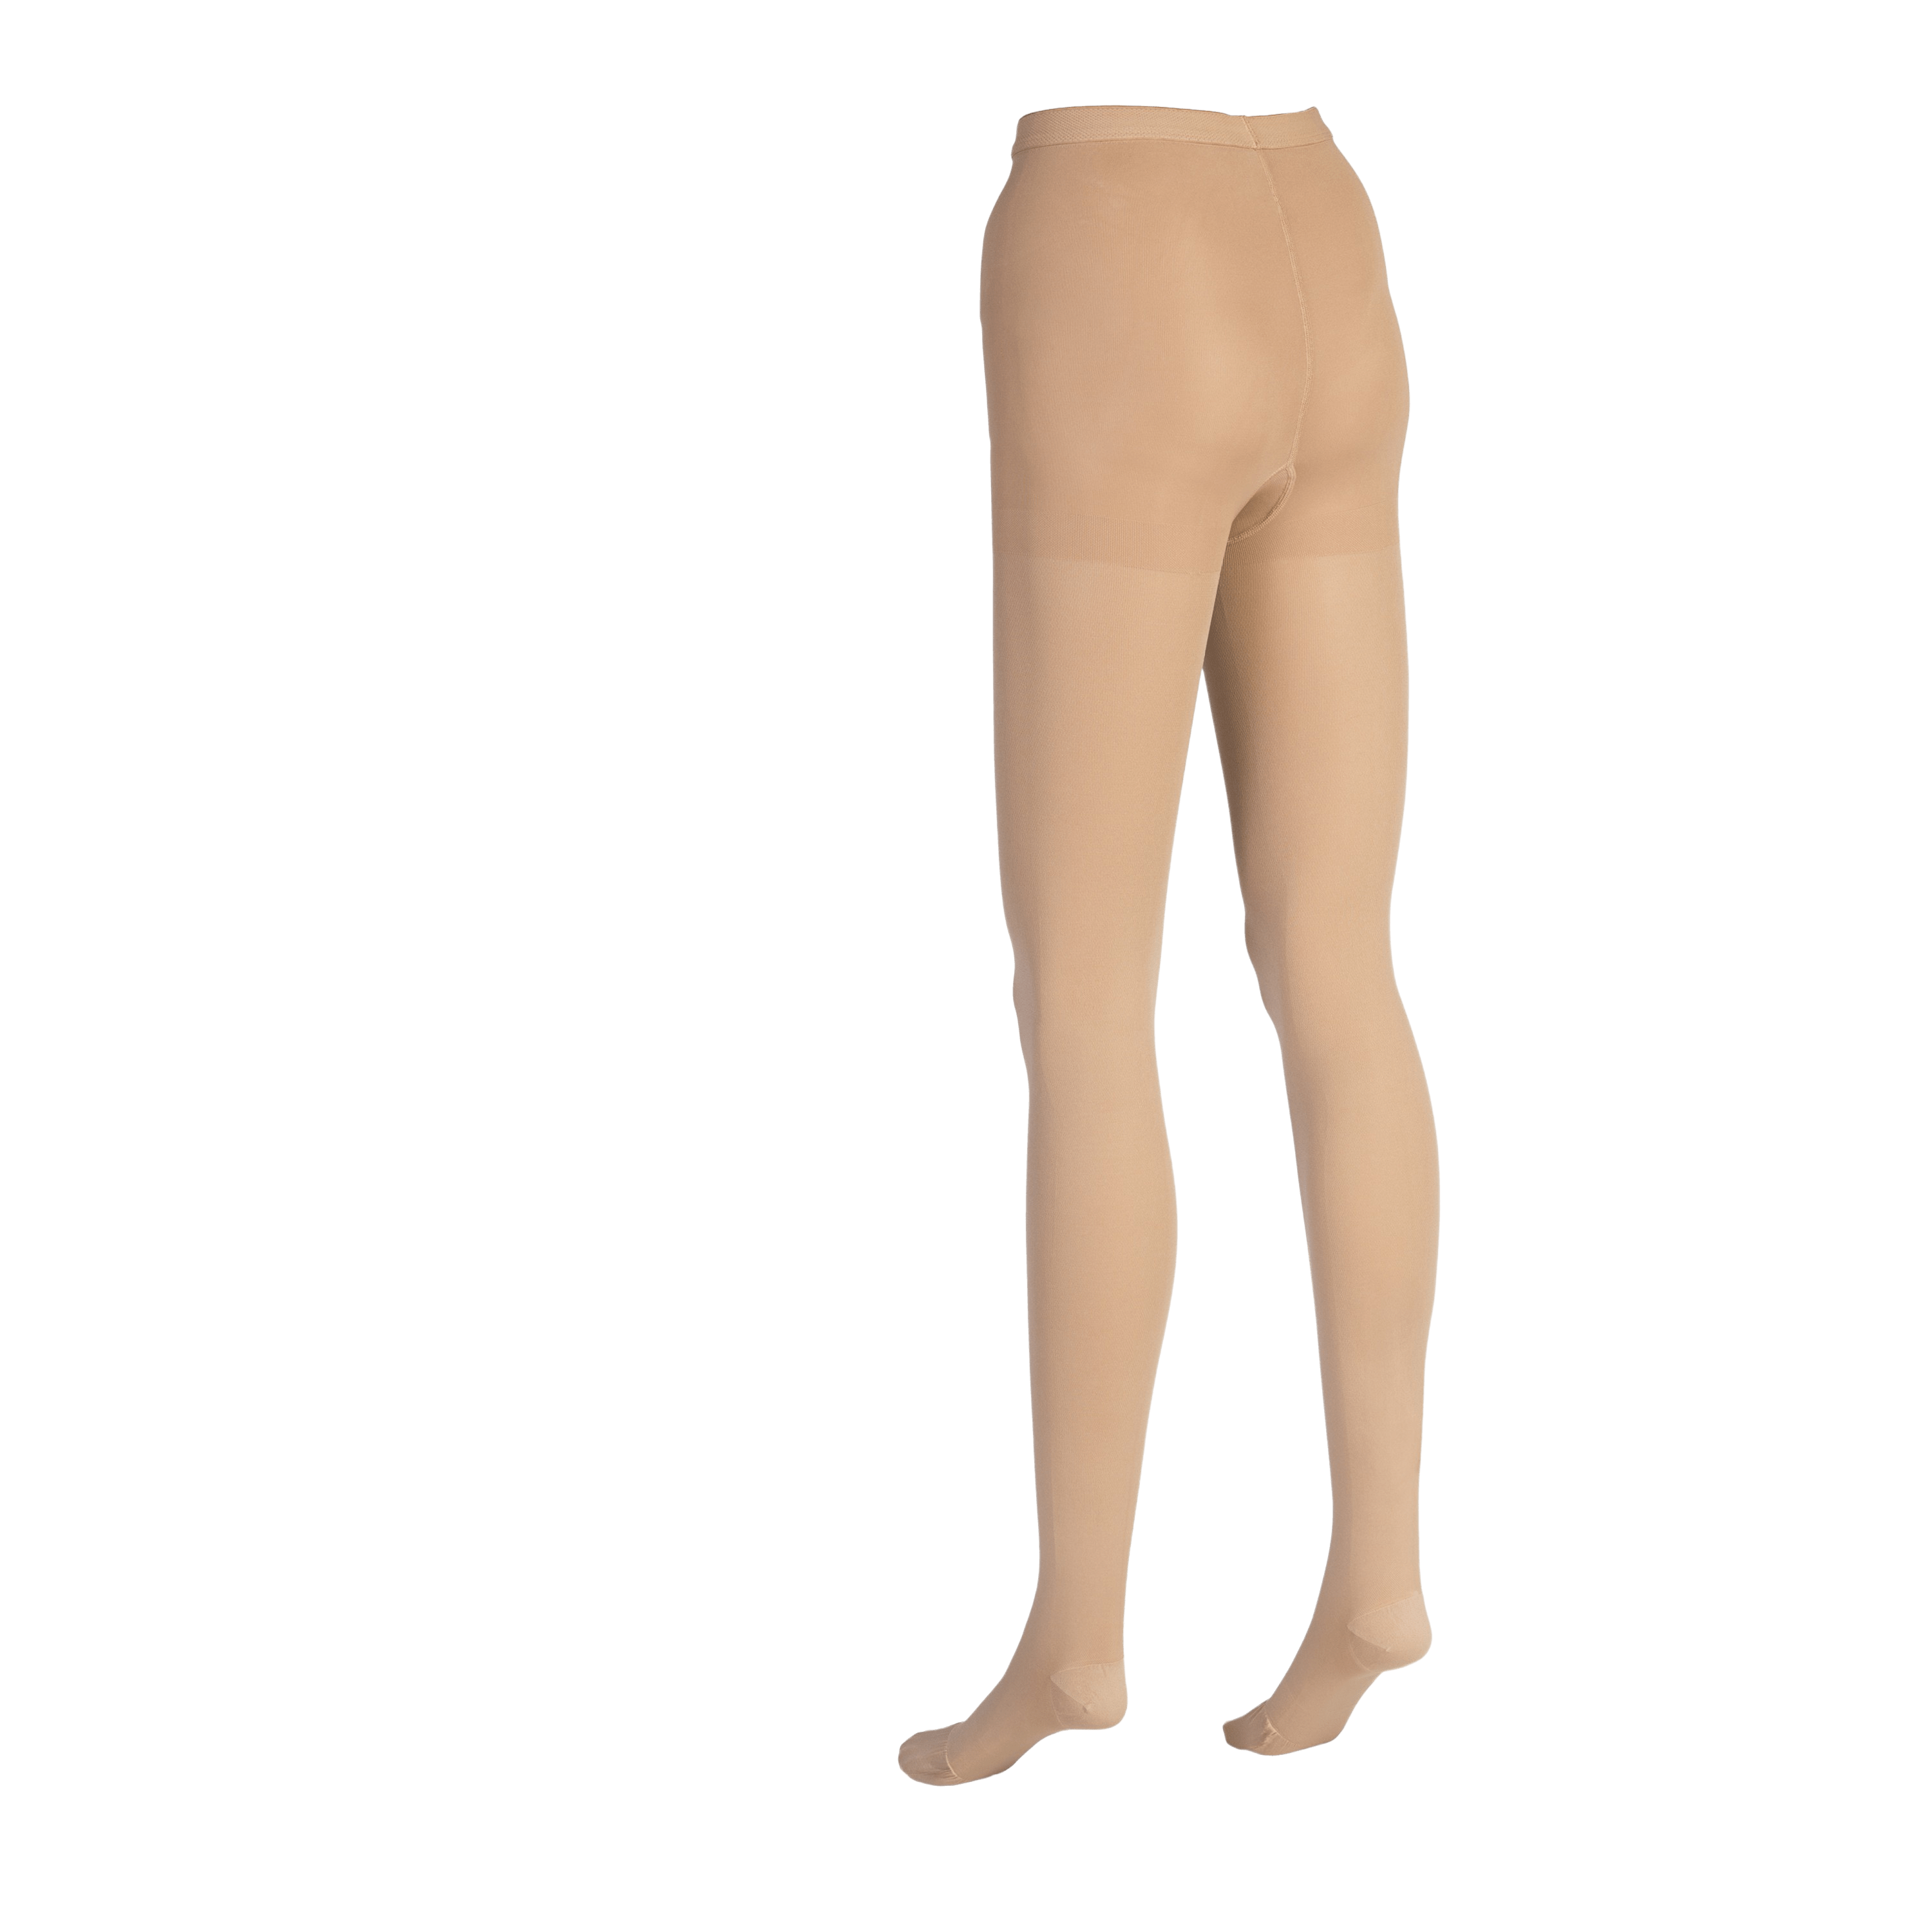 Made in USA - Extra Wide Womens Compression Tights 20-30mmHg